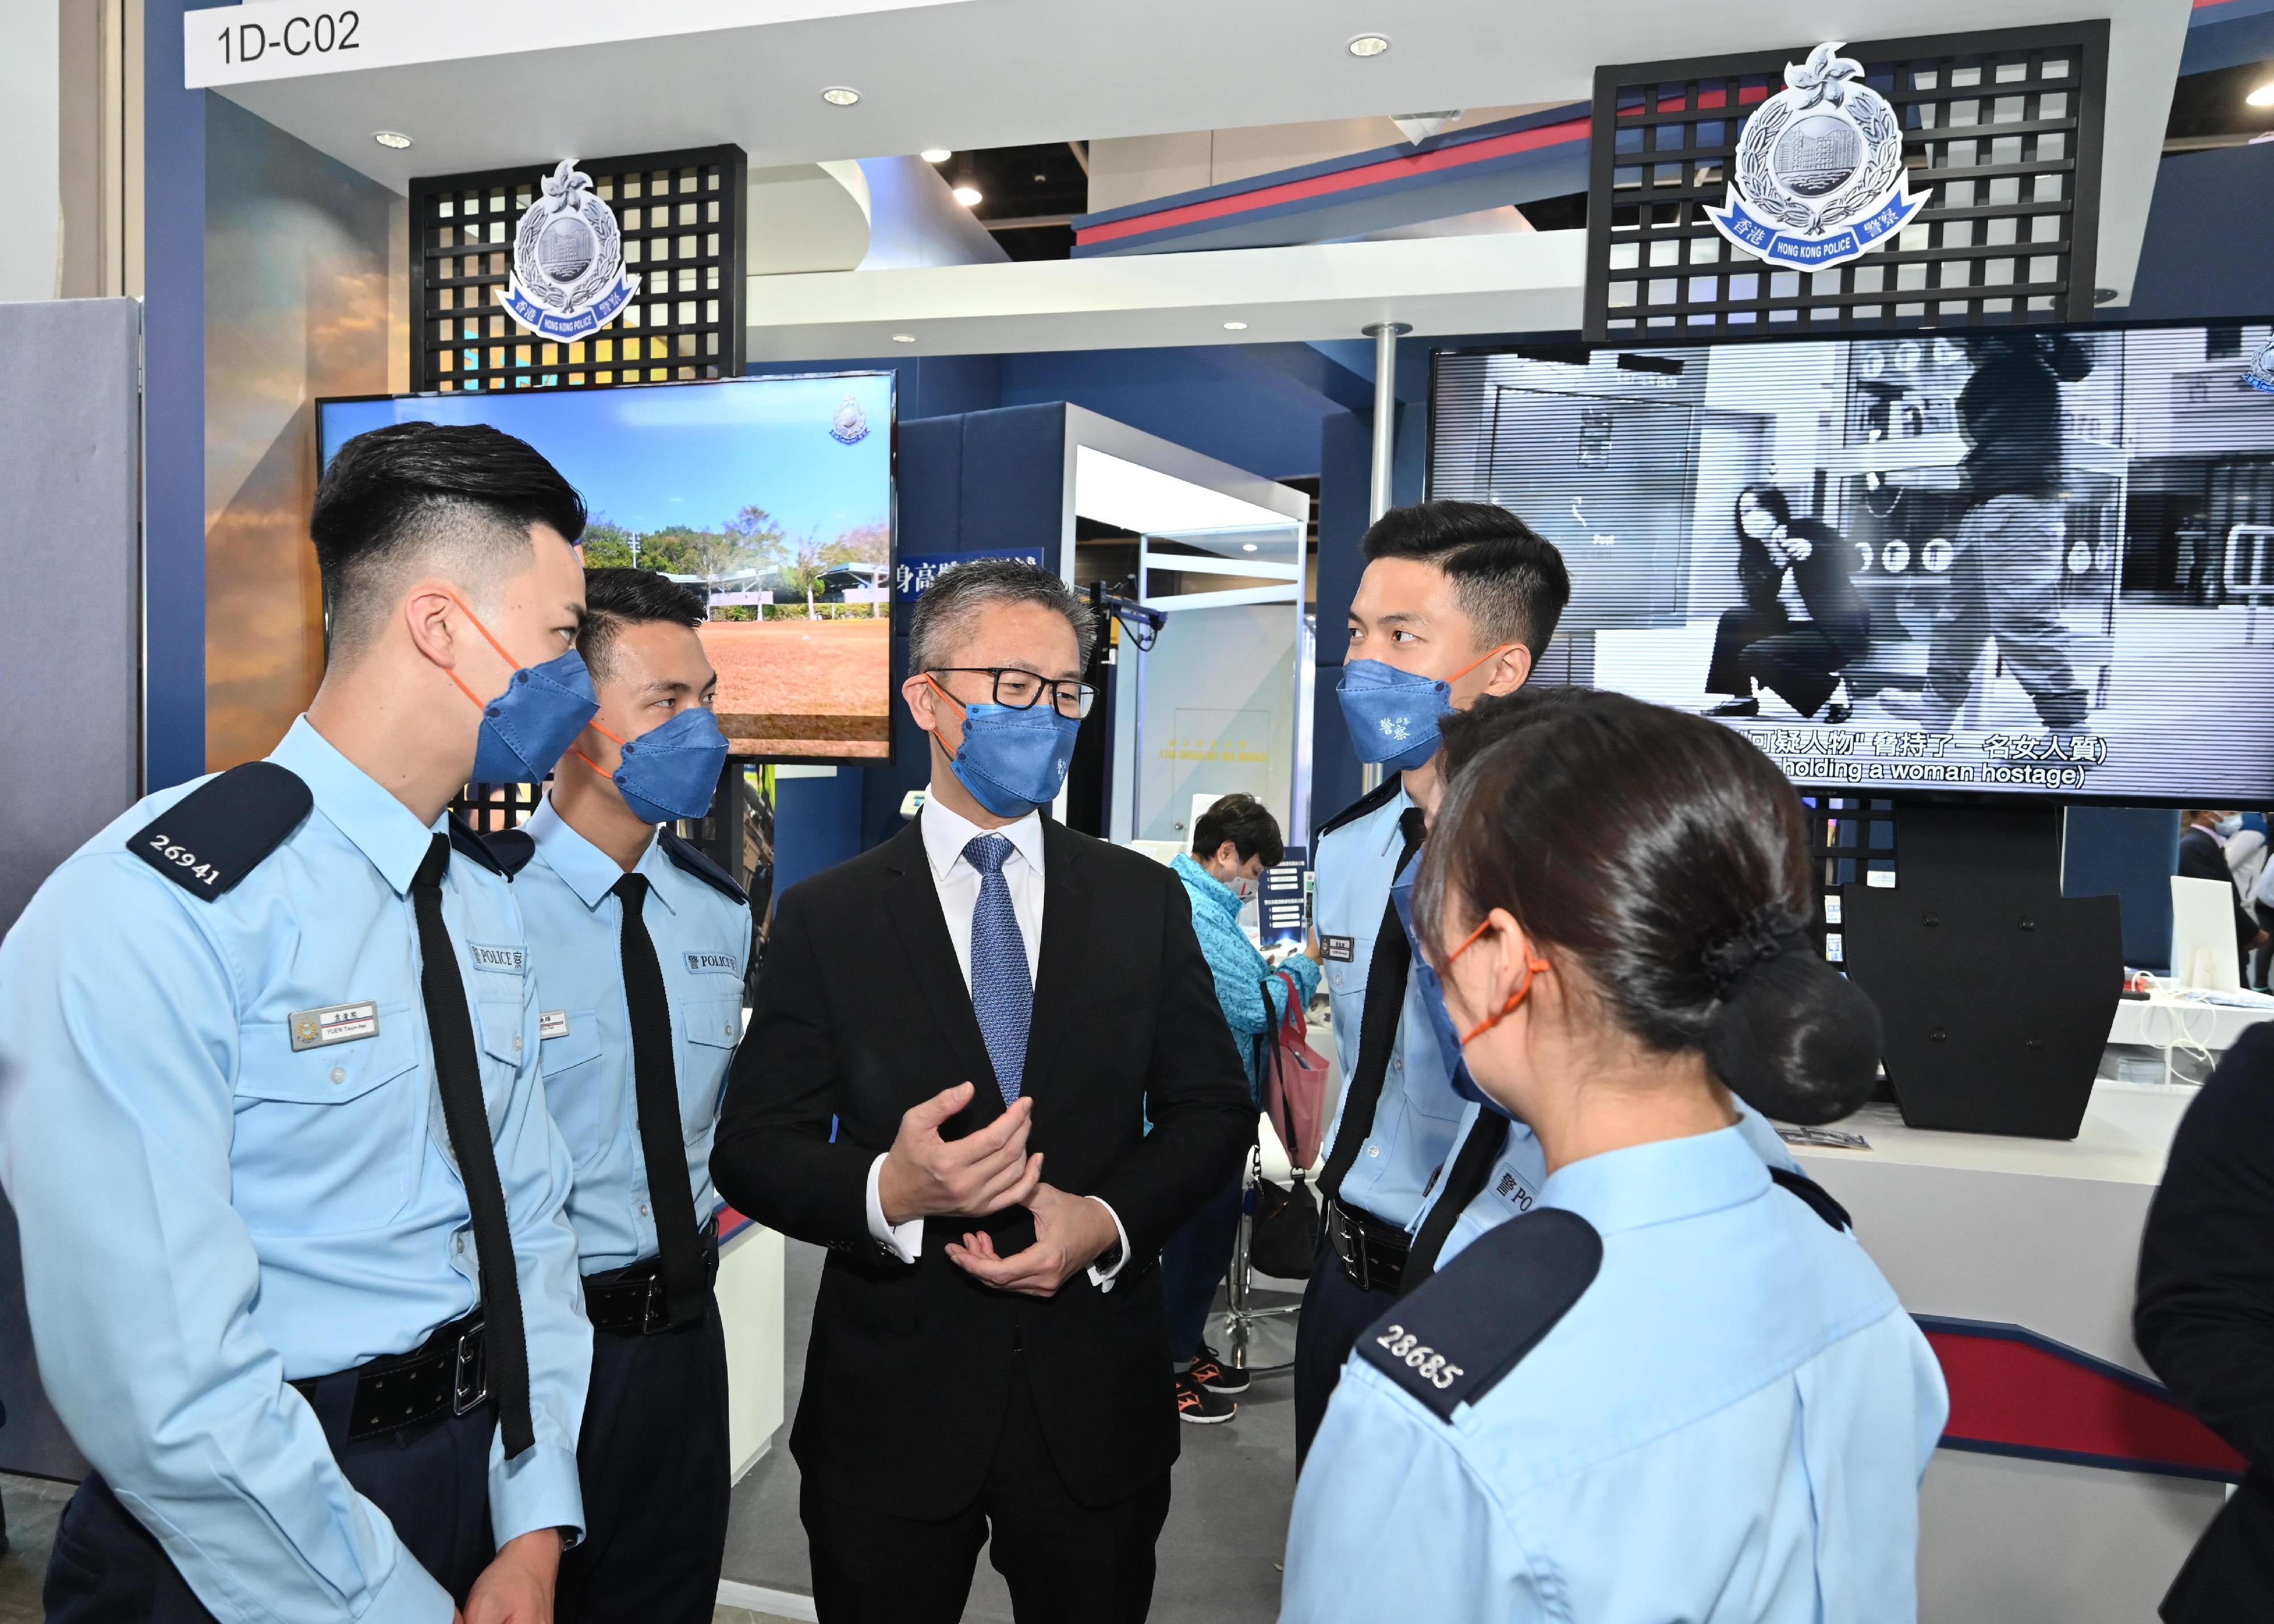 The Police Force introduces its work and provides recruitment information to visitors at the four-day Education and Careers Expo 2023 starting today (February 2). Photo shows the Commissioner of Police, Mr Siu Chak-yee, touring the Police recruitment booth.